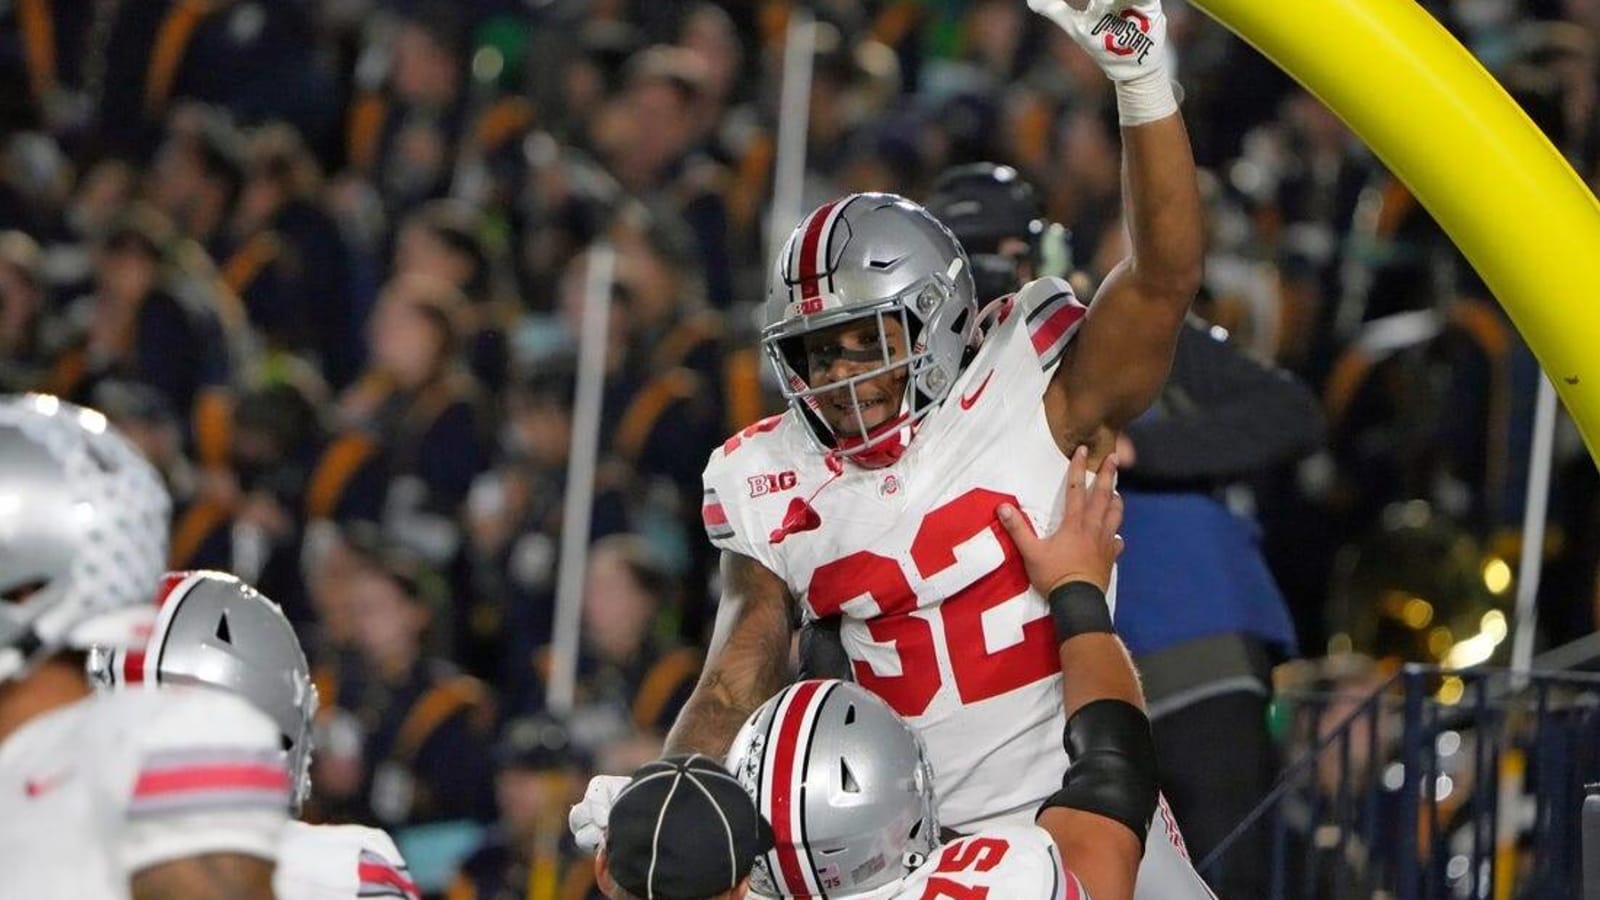 Ohio State climbs to No. 4 in Top 25 after win at Notre Dame